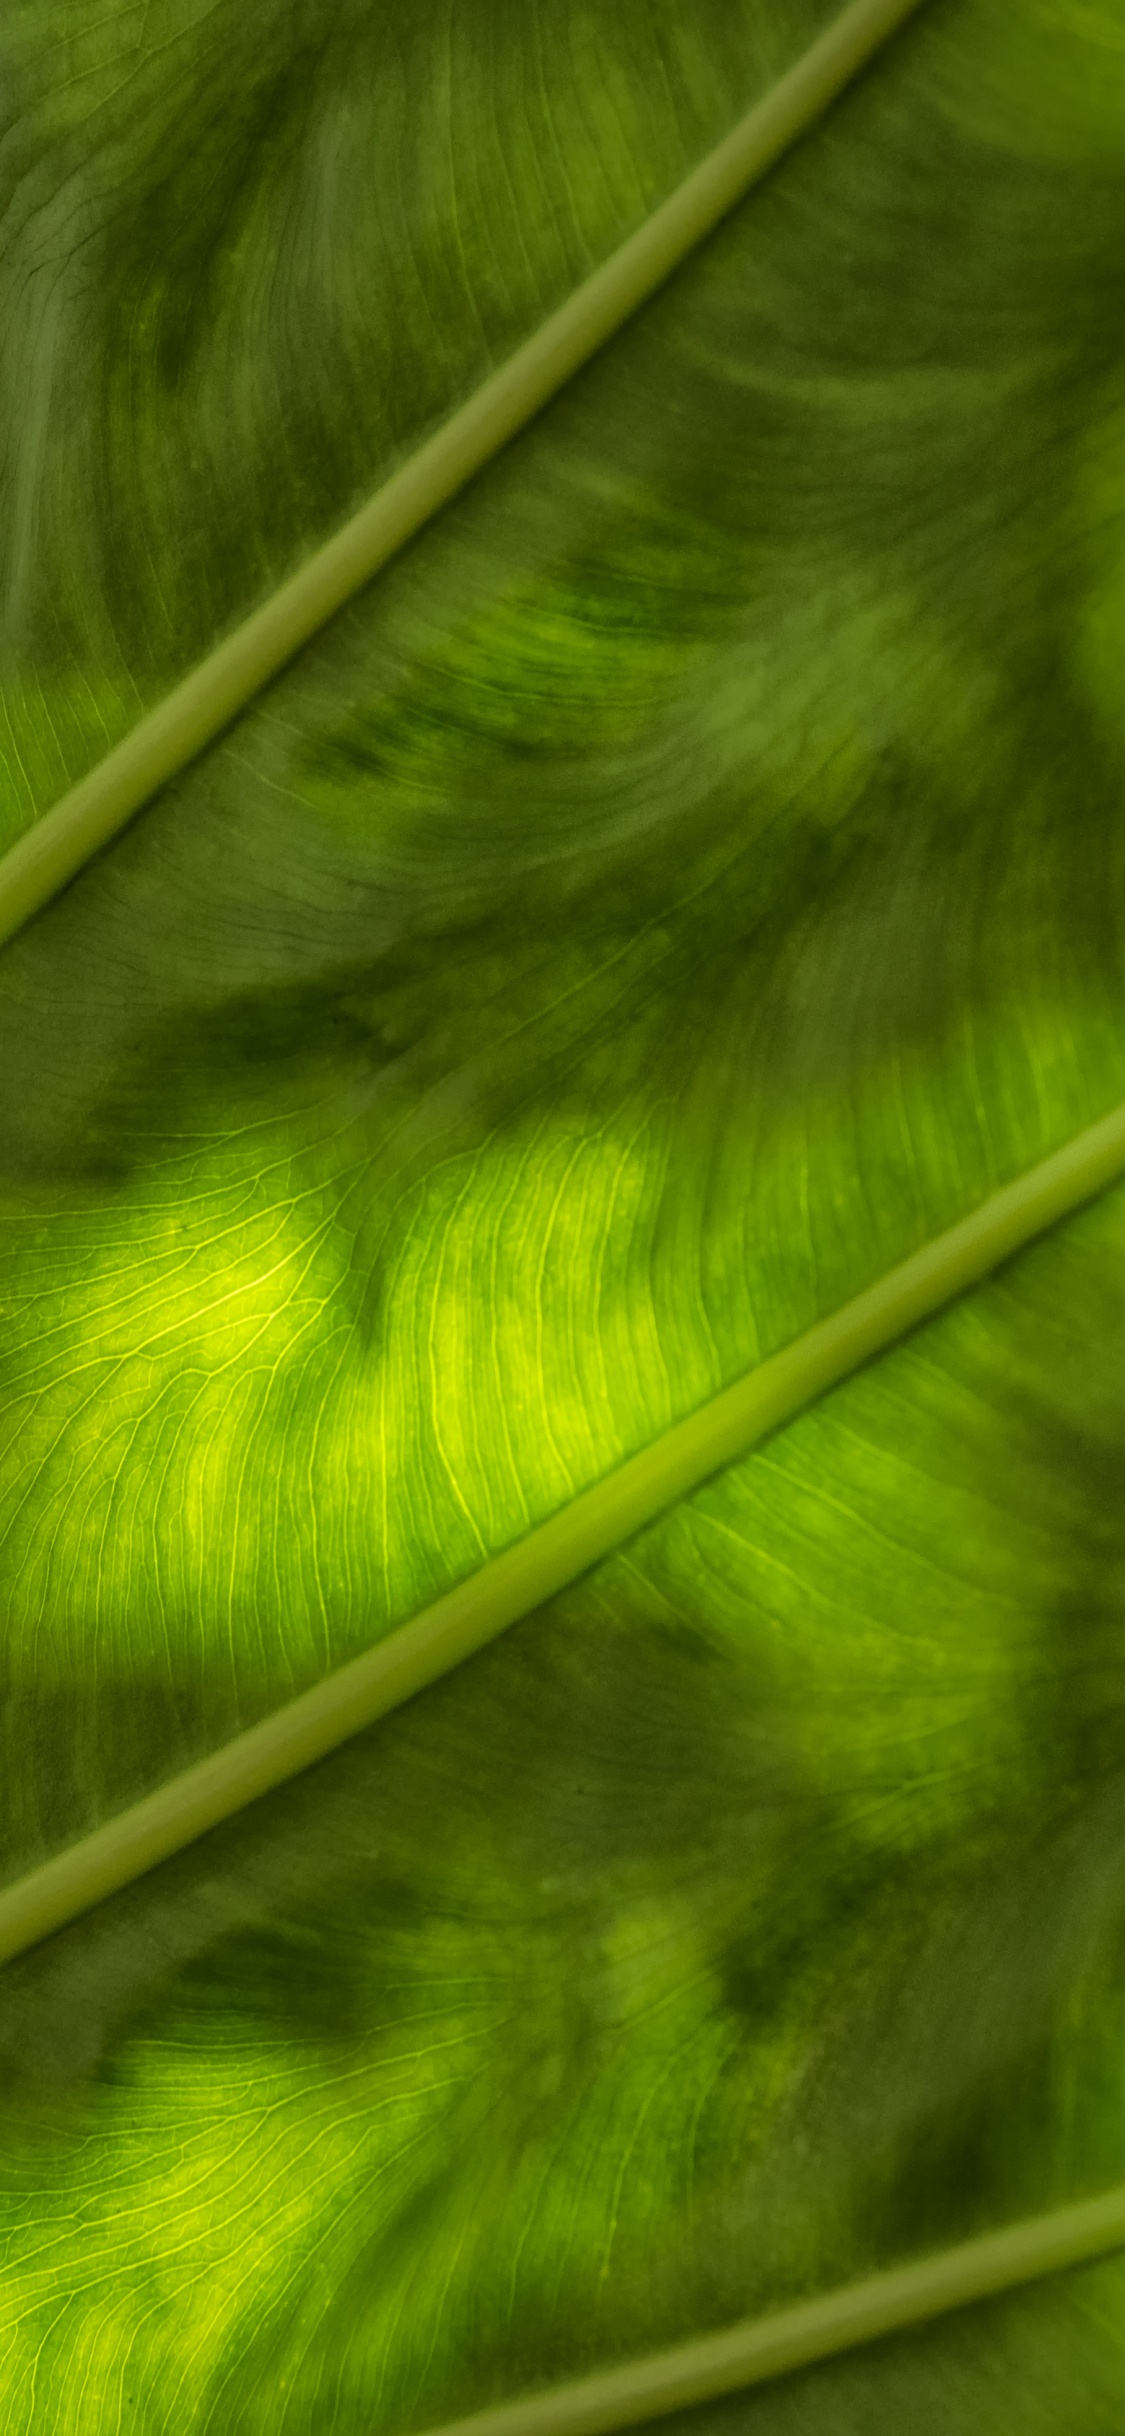 Green and White Stripe Textile. Wallpaper in 1125x2436 Resolution